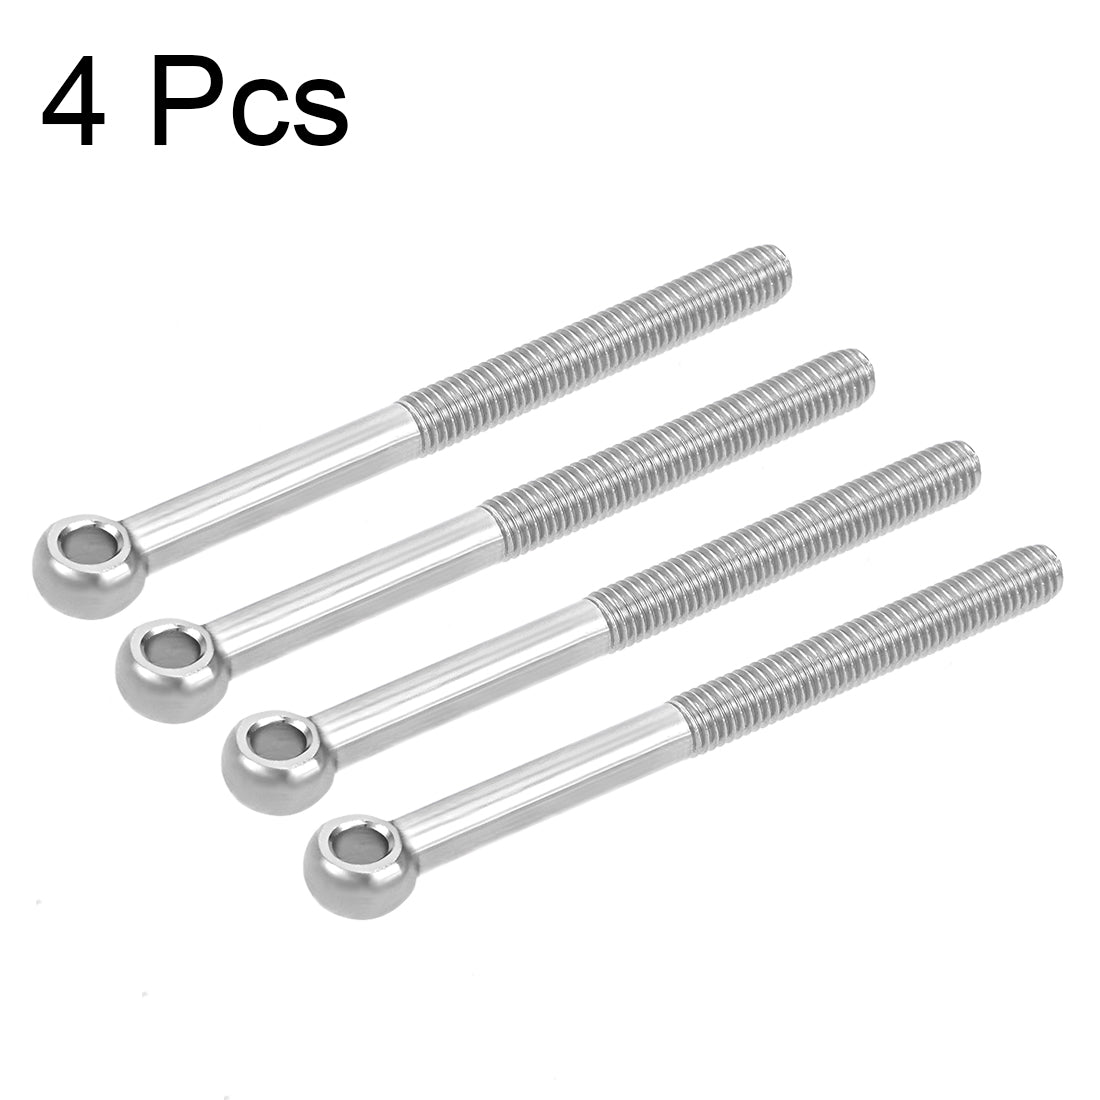 Uxcell Uxcell M12 x 120mm 304 Stainless Steel Machine Shoulder Lift Eye Bolt Rigging 4pcs